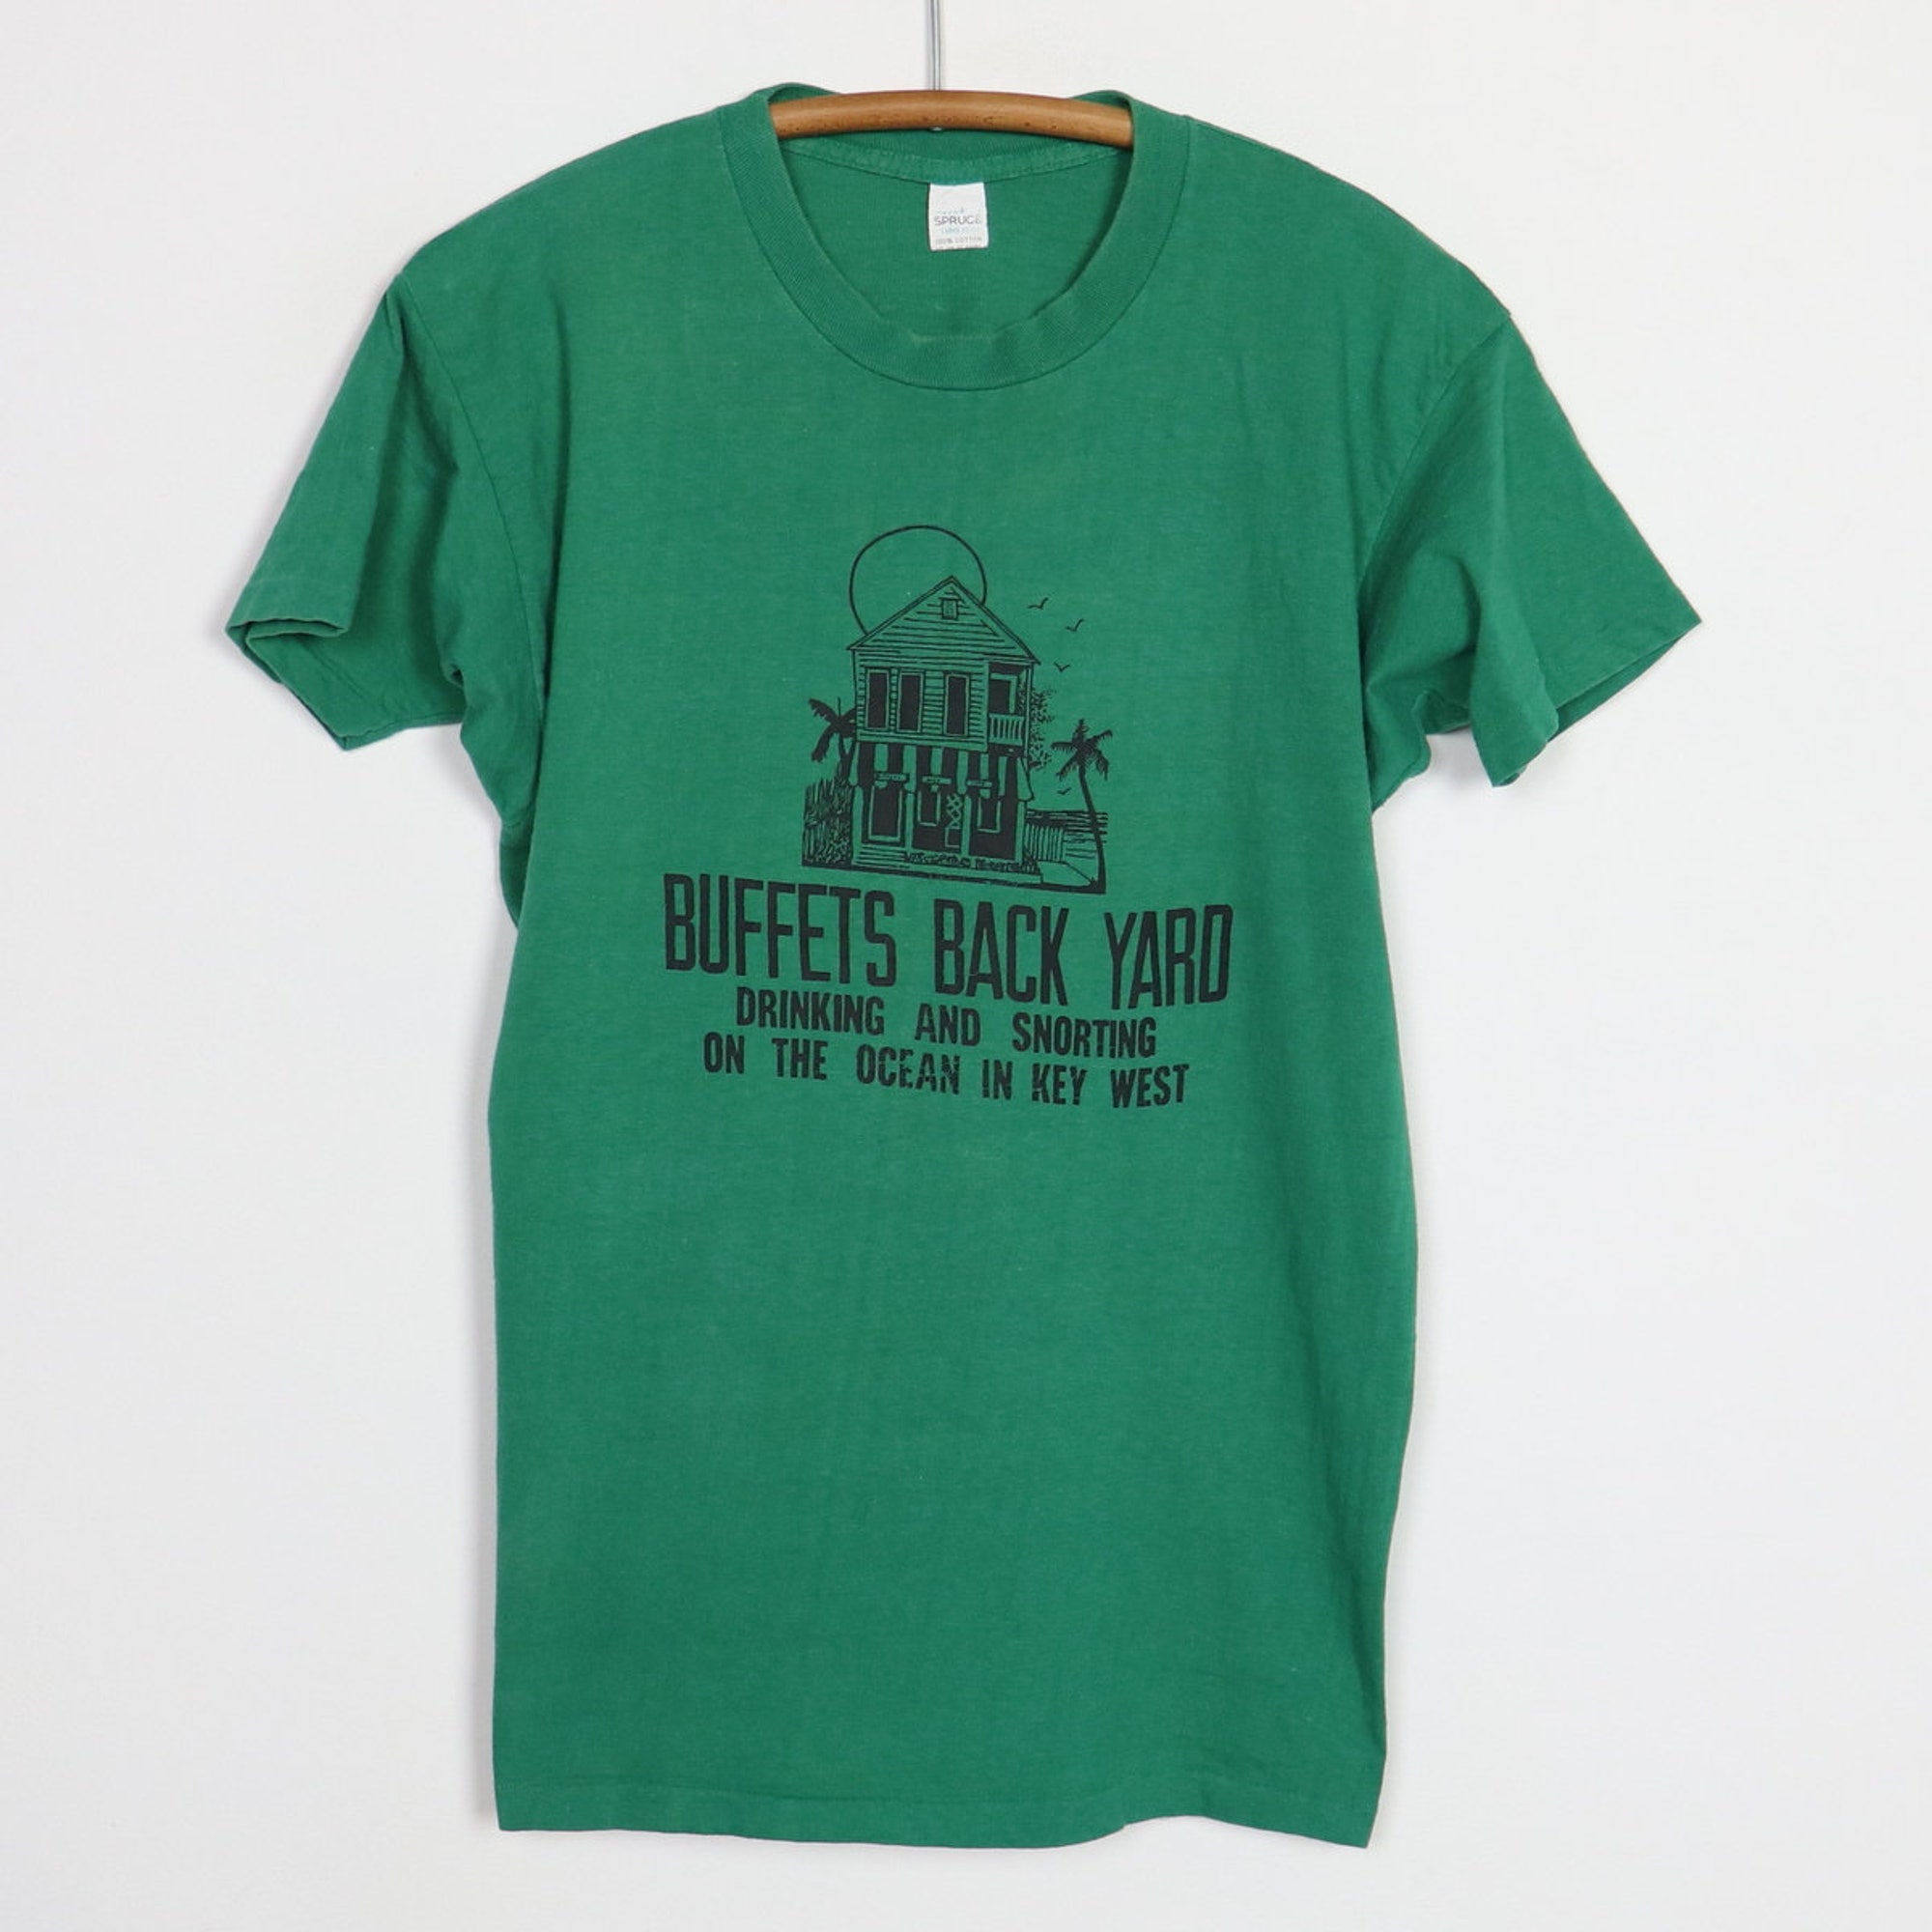 Discover vintage 1970s Jimmy Buffett's Back Yard Drinking And Snorting Key West Shirt